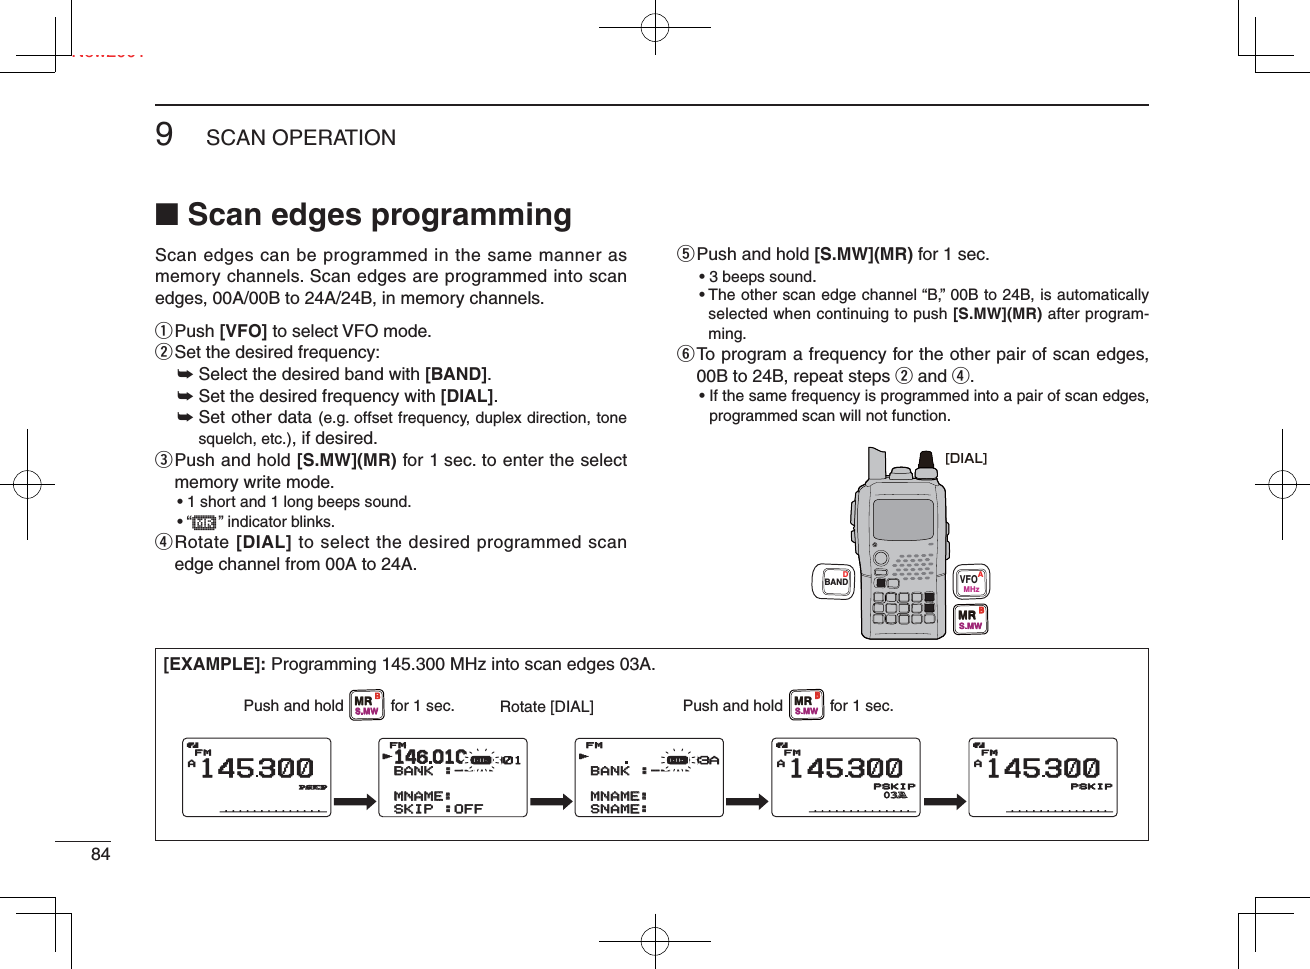 Ne849SCAN OPERATIONNew2001■ Scan edges programmingScan edges can be programmed in the same manner as memory channels. Scan edges are programmed into scan edges, 00A/00B to 24A/24B, in memory channels.q Push  [VFO] to select VFO mode.w Set the desired frequency:➥ Select the desired band with [BAND].➥ Set the desired frequency with [DIAL].➥  Set other data (e.g. offset frequency, duplex direction, tone squelch, etc.), if desired.e  Push and hold [S.MW](MR) for 1 sec. to enter the select memory write mode.• 1 short and 1 long beeps sound.• “μ    ” indicator blinks.r  Rotate [DIAL] to select the desired programmed scan edge channel from 00A to 24A.t Push and hold [S.MW](MR) for 1 sec.• 3 beeps sound.•  The other scan edge channel “B,” 00B to 24B, is automatically selected when continuing to push [S.MW](MR) after program-ming.y  To program a frequency for the other pair of scan edges, 00B to 24B, repeat steps w and r.•  If the same frequency is programmed into a pair of scan edges, programmed scan will not function.[EXAMPLE]: Programming 145.300 MHz into scan edges 03A.[DIAL]VFOMHzAMRS.MWBBANDDAFMFM145300PSKIPSKIPAFM145300PSKIPSKIP03A03AAFM145300PSKIPSKIP14146010010BANKBANK :----:----    MNAME:MNAME:SKIPSKIP :OFF:OFFFMrμ001BANKBANK :----:----  MNAME:MNAME:SNAME:SNAME:FMFMrμ03APush and hold          for 1 sec. Rotate [DIAL] Push and hold          for 1 sec.MRS.MWBMRS.MWB